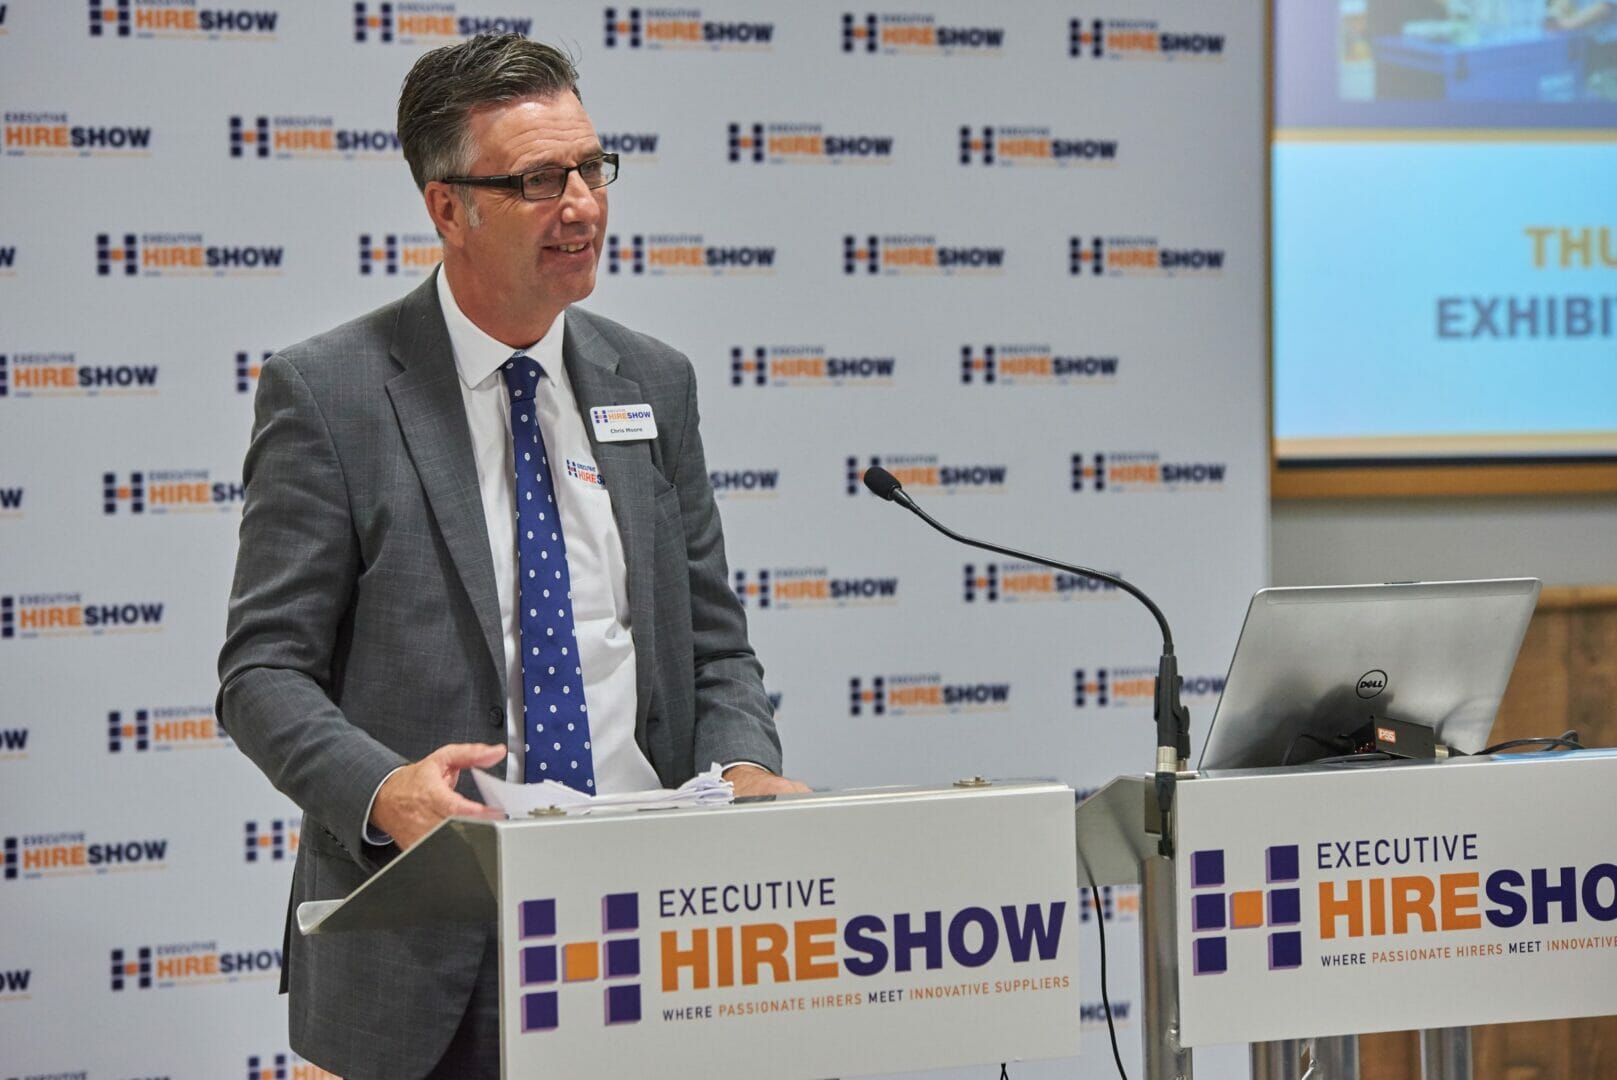 The Executive Hire Show 2020 kicks off to a great start! @ExecHireShow